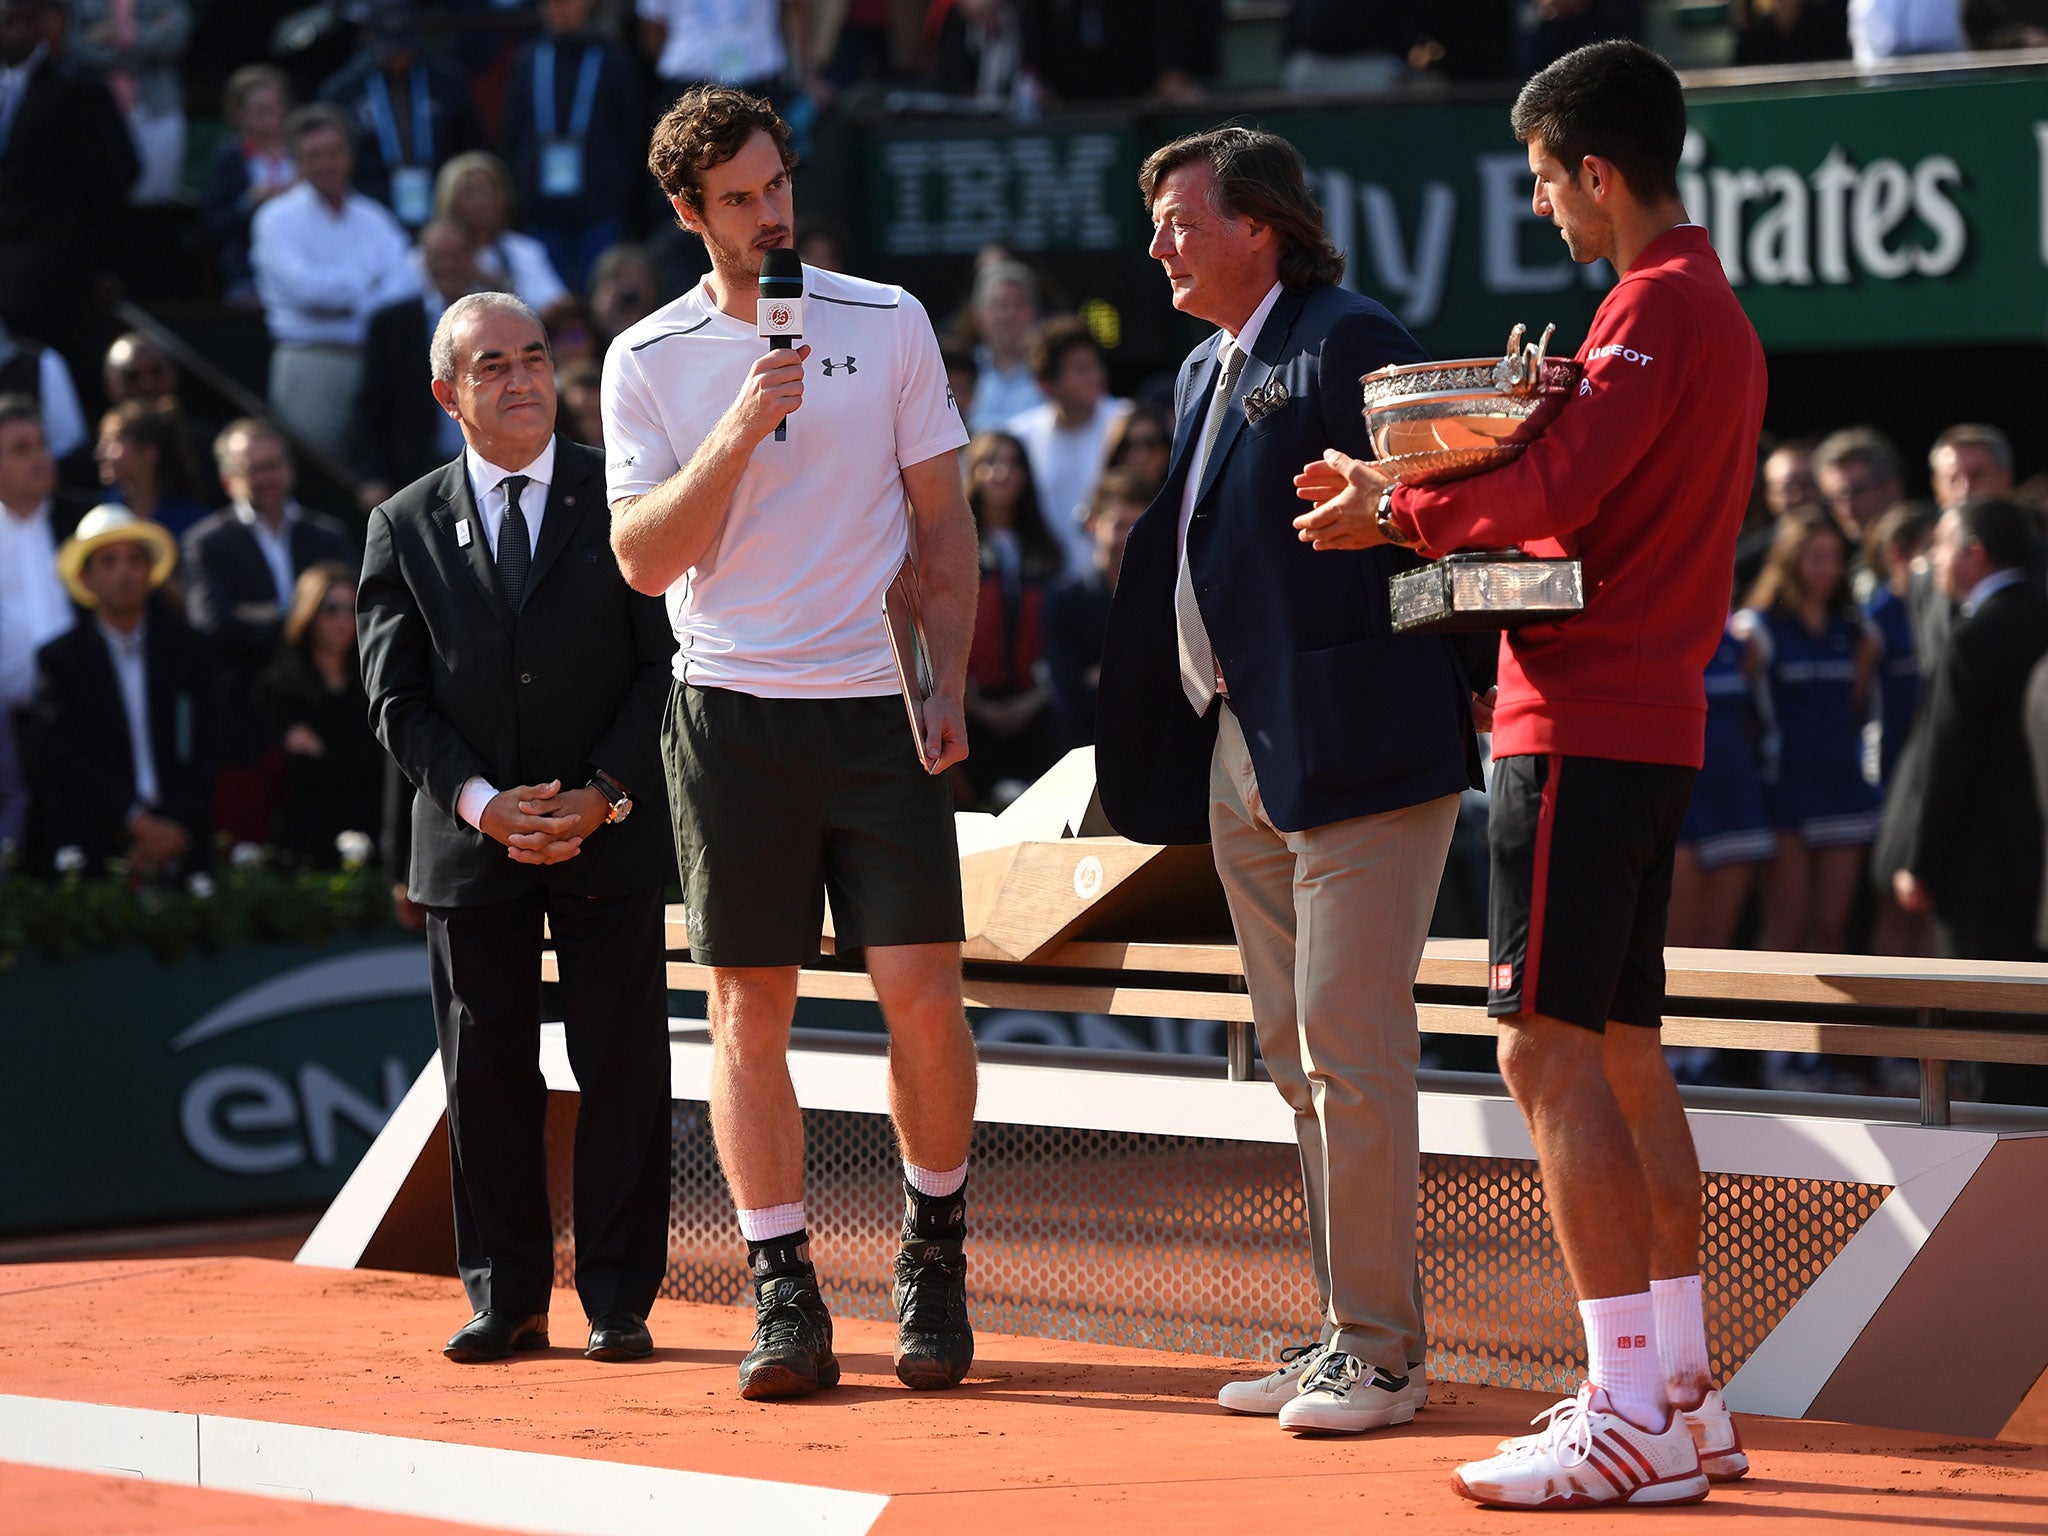 Andy Murray ran out of steam in losing to Novak Djokovic in the French Open final